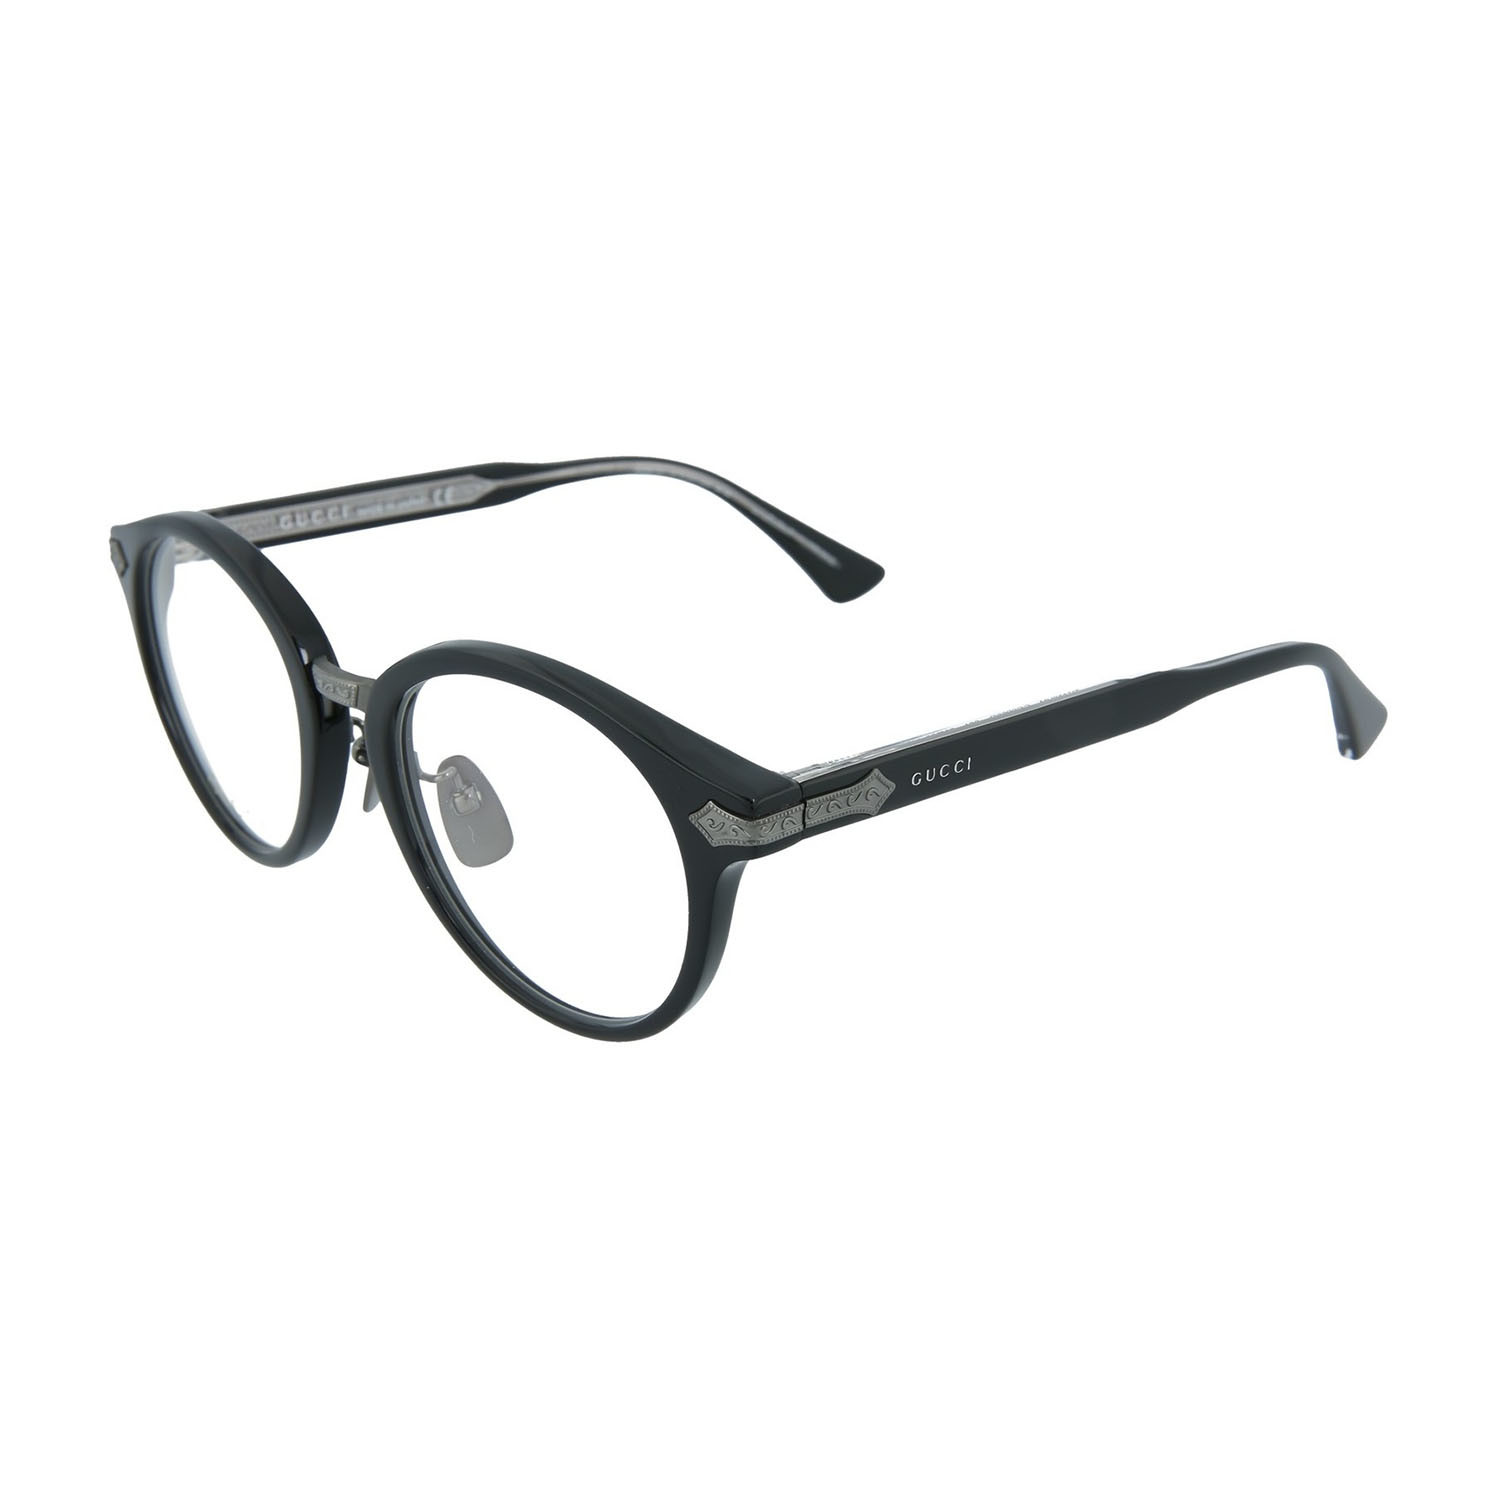 Men's Round Optical Frames // Black - Gucci - Touch of Modern